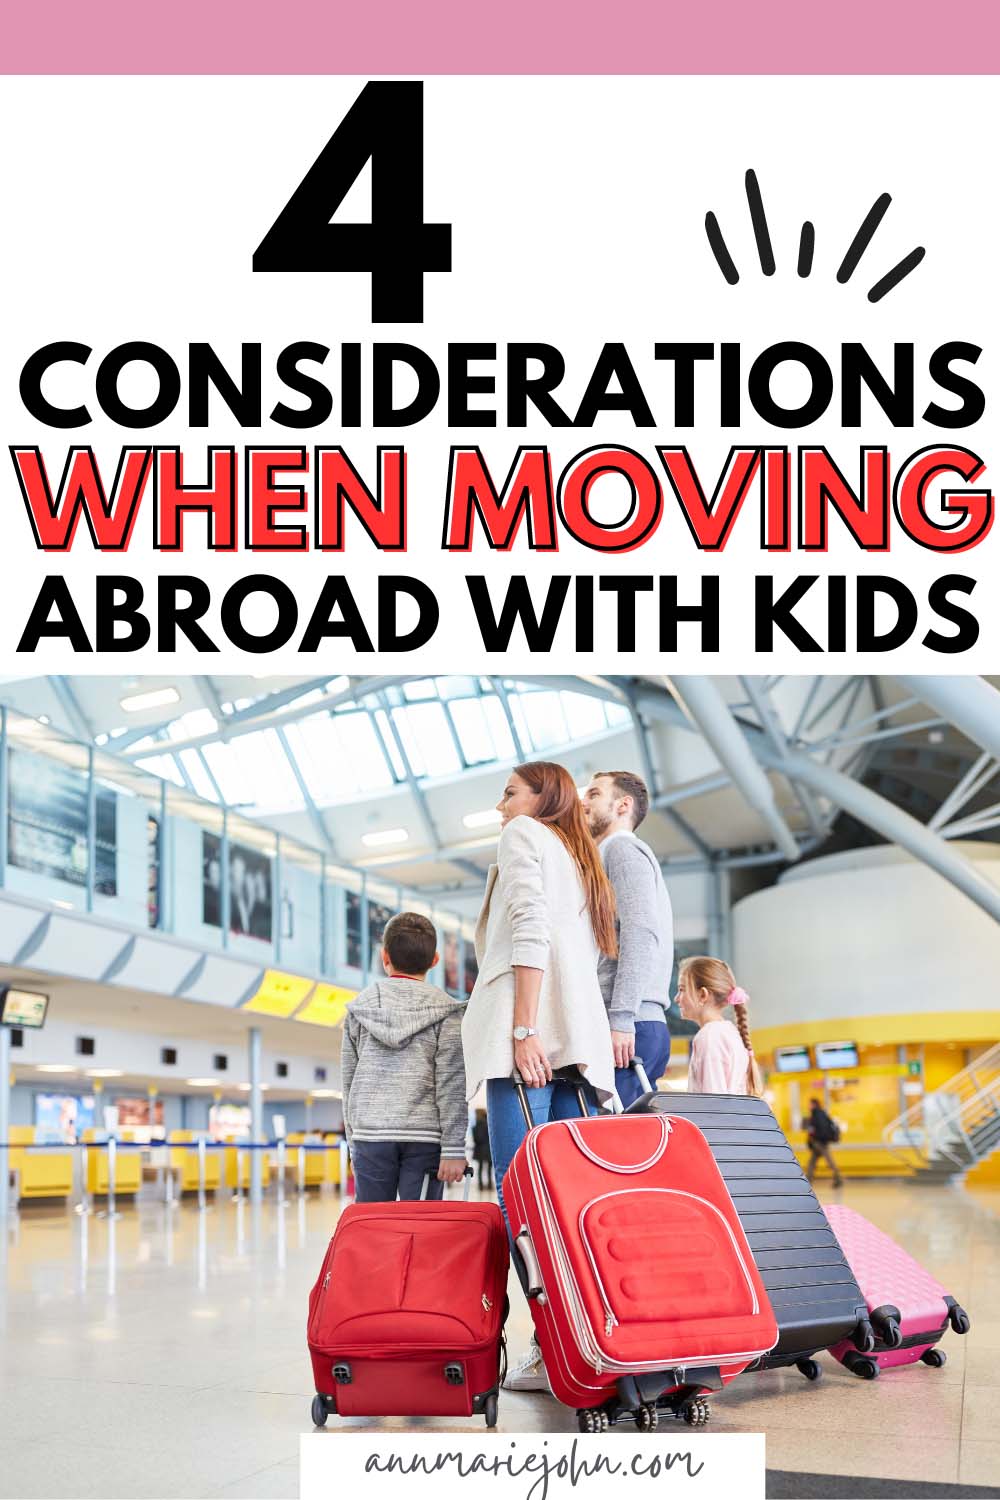 Considerations When Moving Abroad With Kids